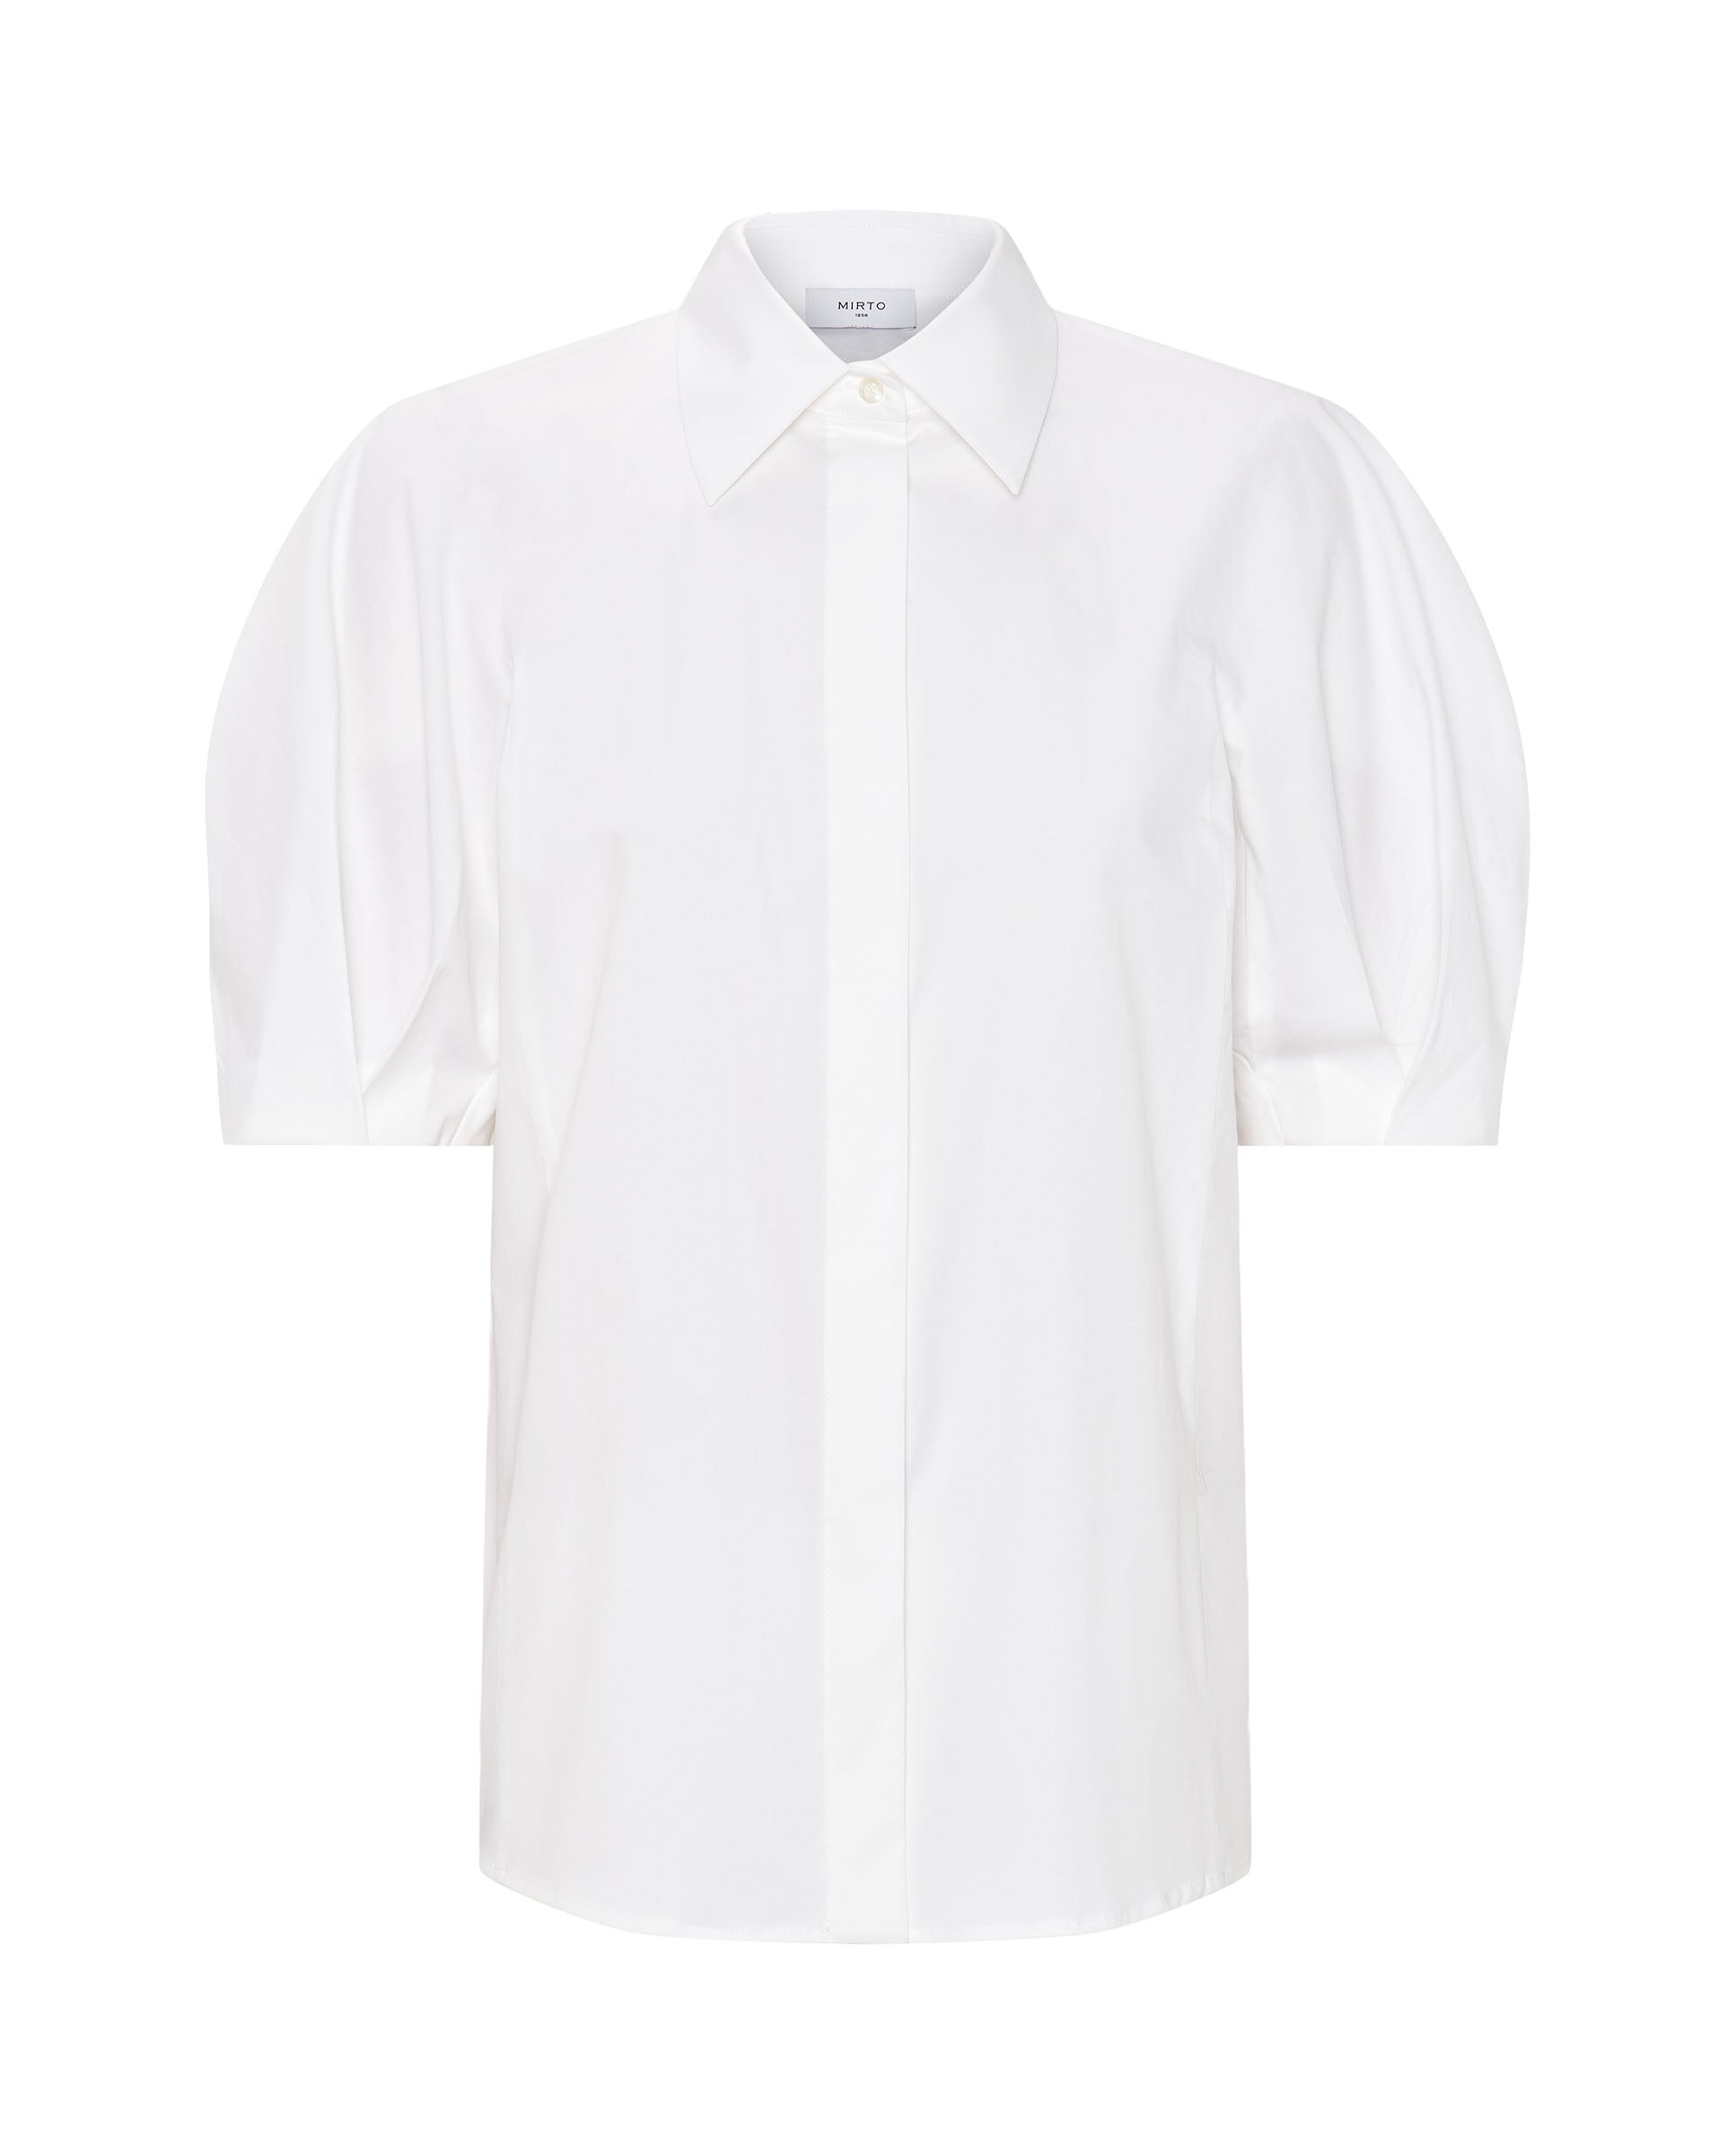 White cotton shirt with short sleeves by MIRTO